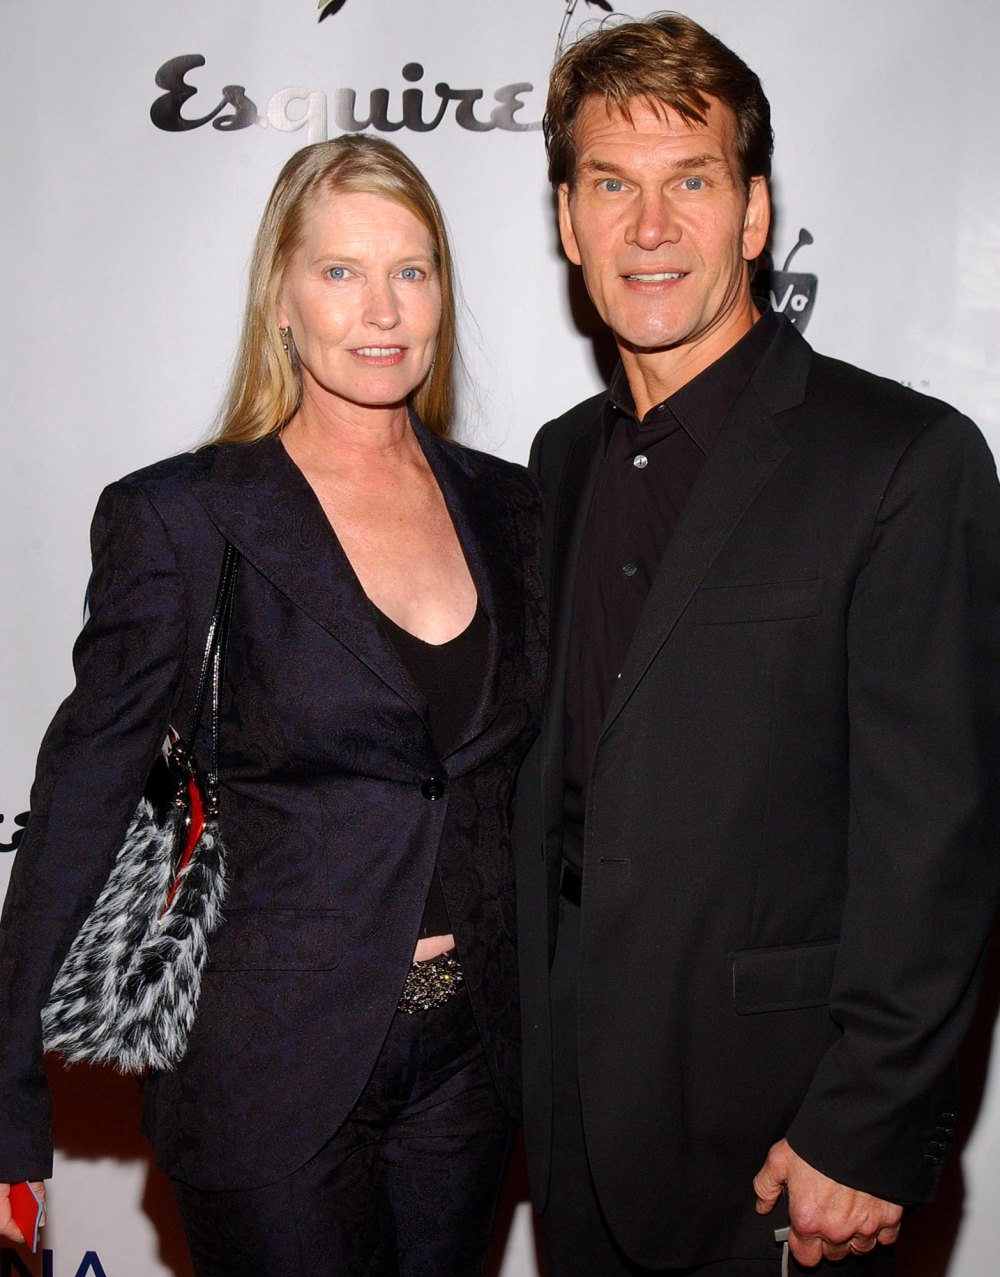 Patrick Swayze s Widow Got a Lot of Flack for Remarrying After His Death 374